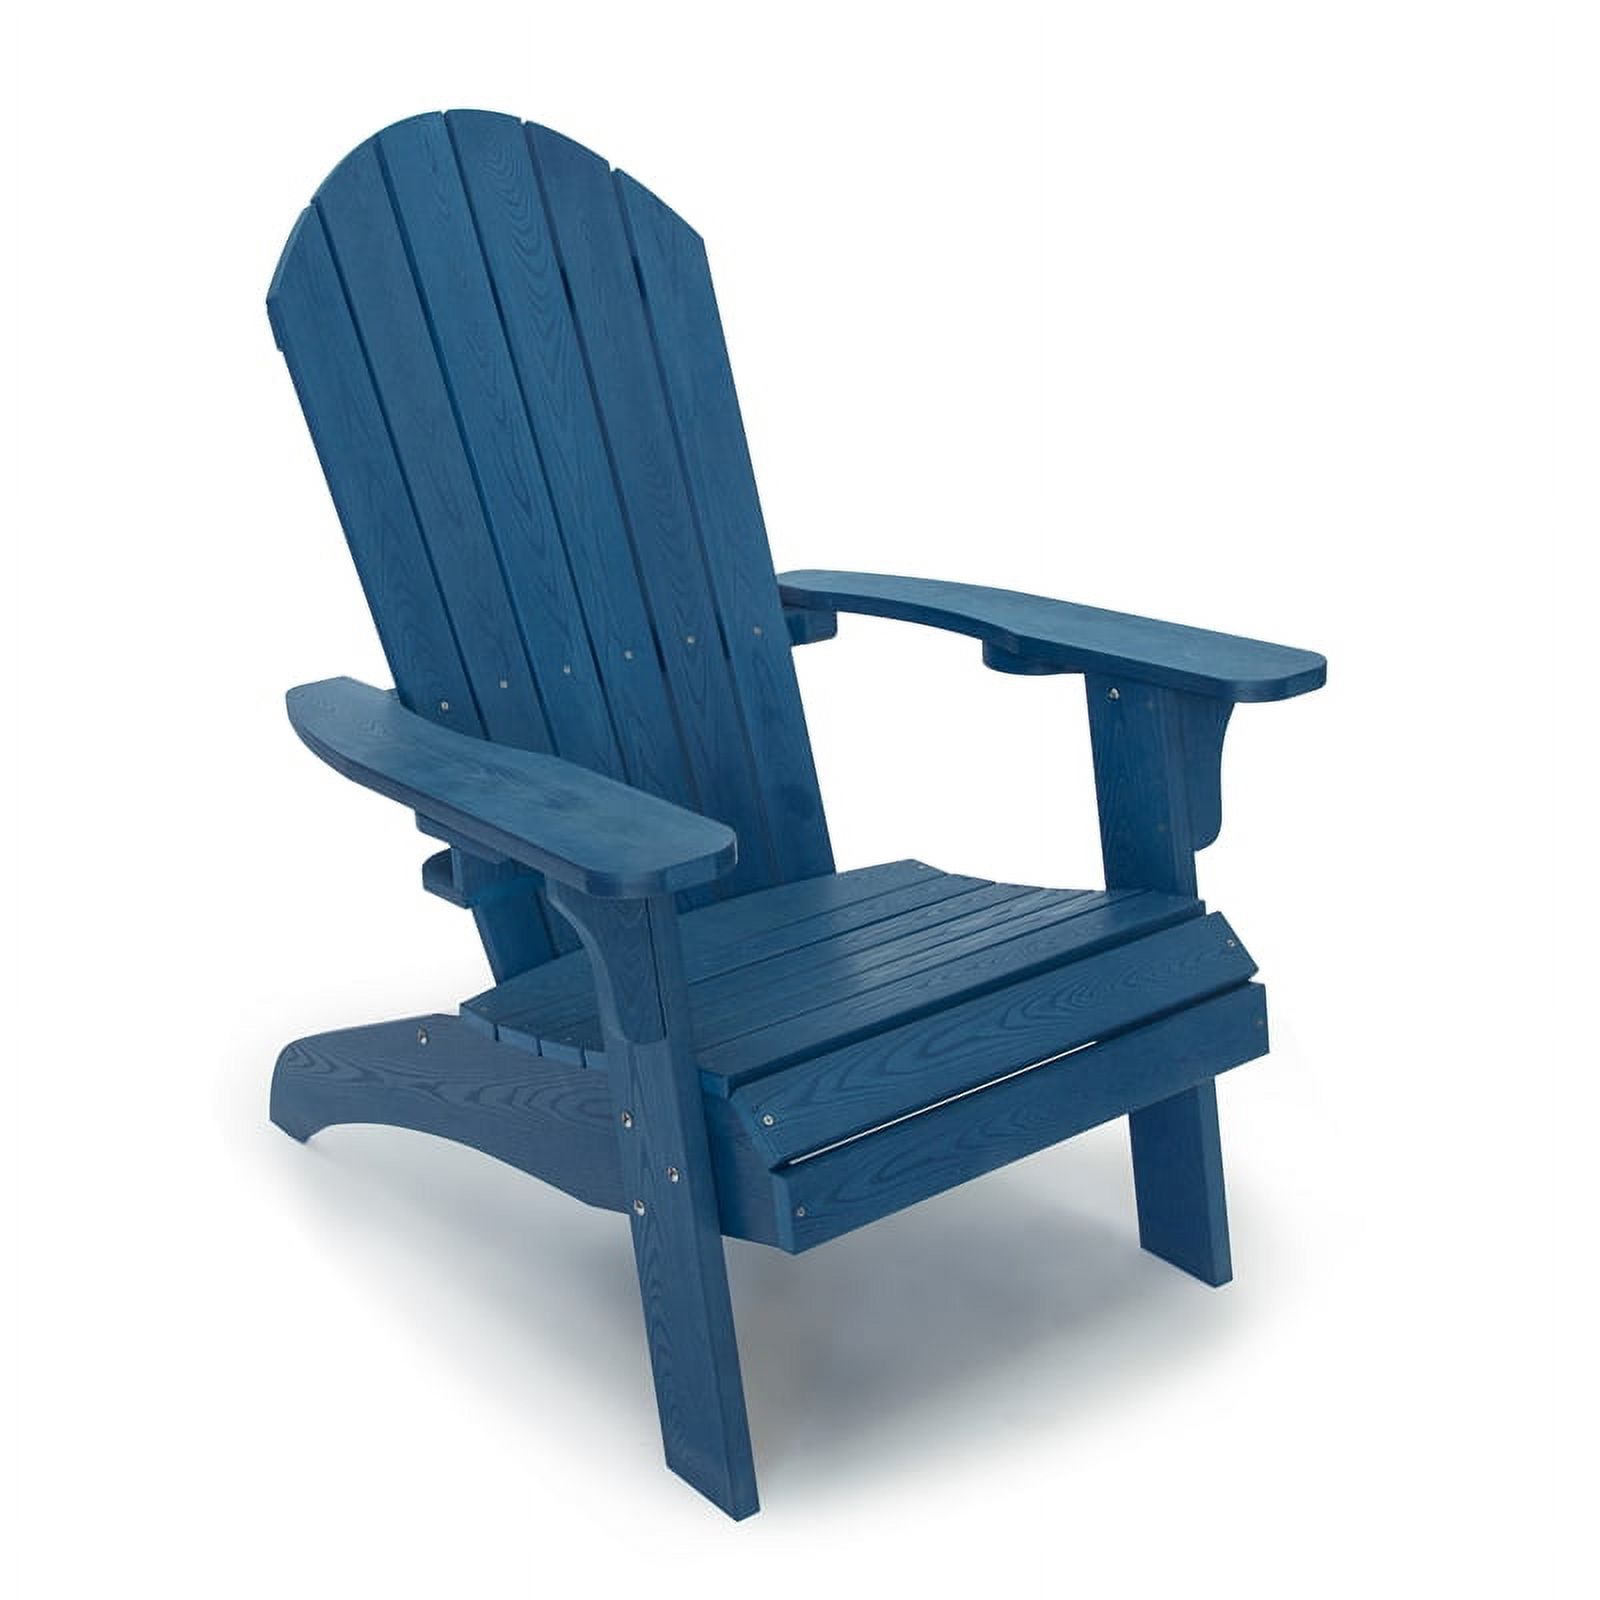 Westwood Navy All Weather Outdoor Patio Adirondack Chair - image 1 of 11